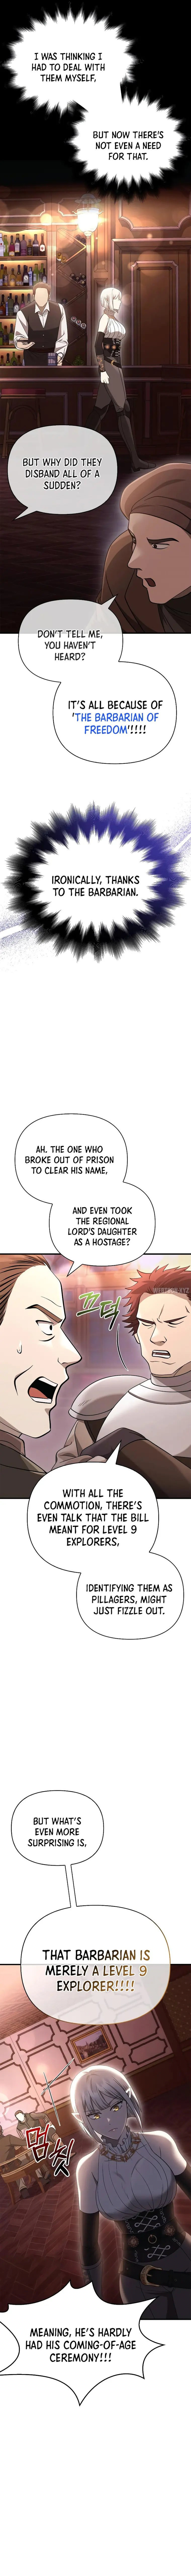 surviving-the-game-as-a-barbarian-chap-36-17